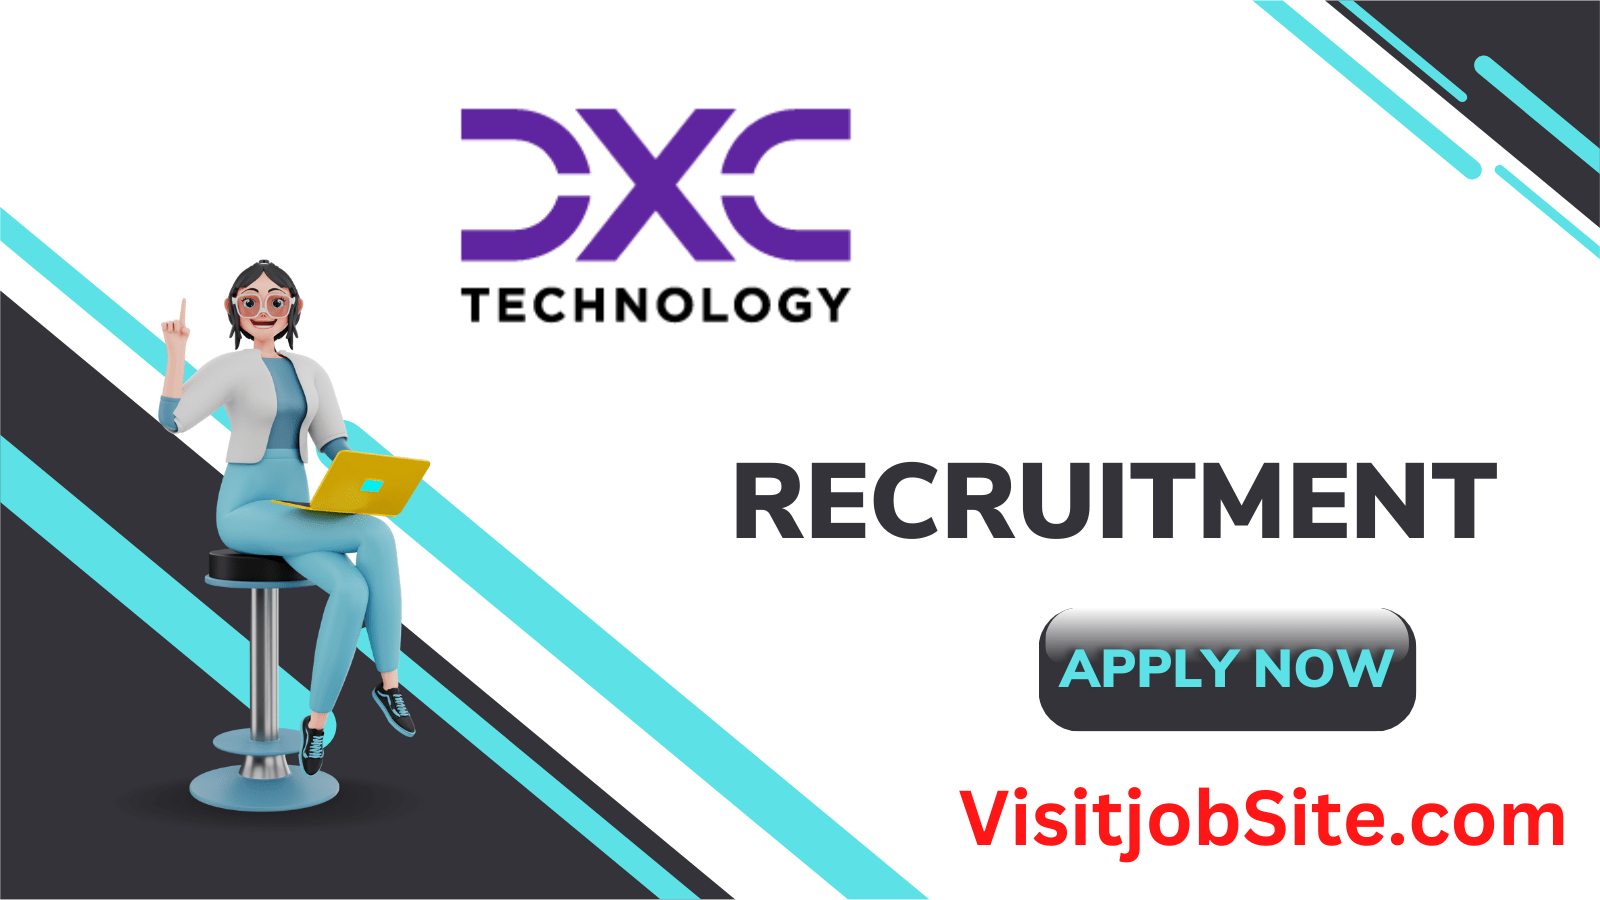 DXC Technology Off Campus Drive